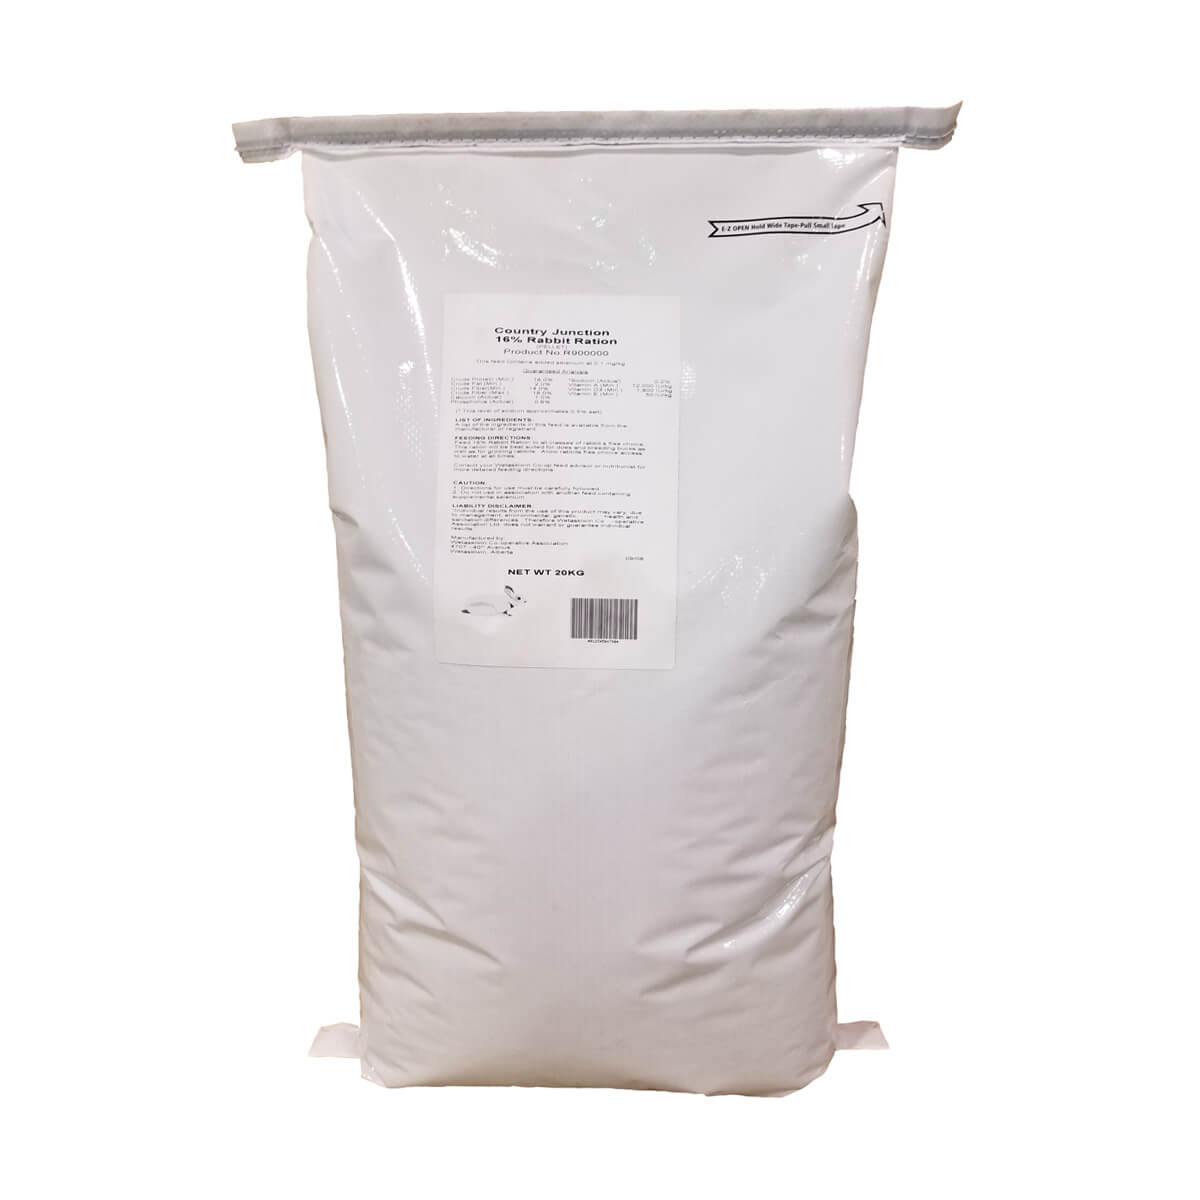 Rabbit Ration - Country Junction 16% - 20 kg